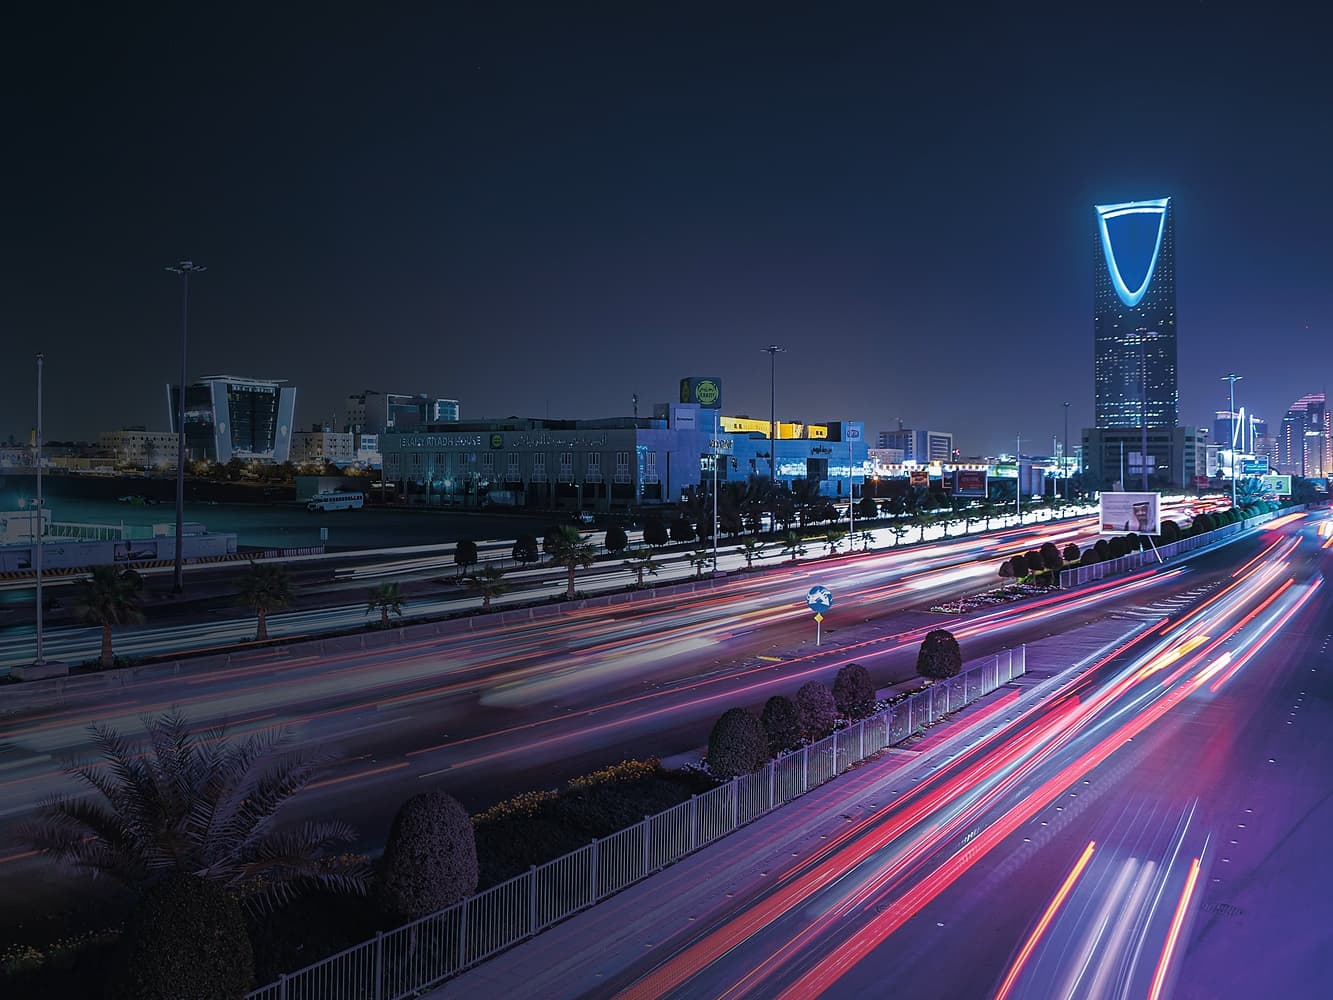 Riyadh, Saudi Arabia: What Are the Future Trends in the Saudi Start-up Investment Landscape?